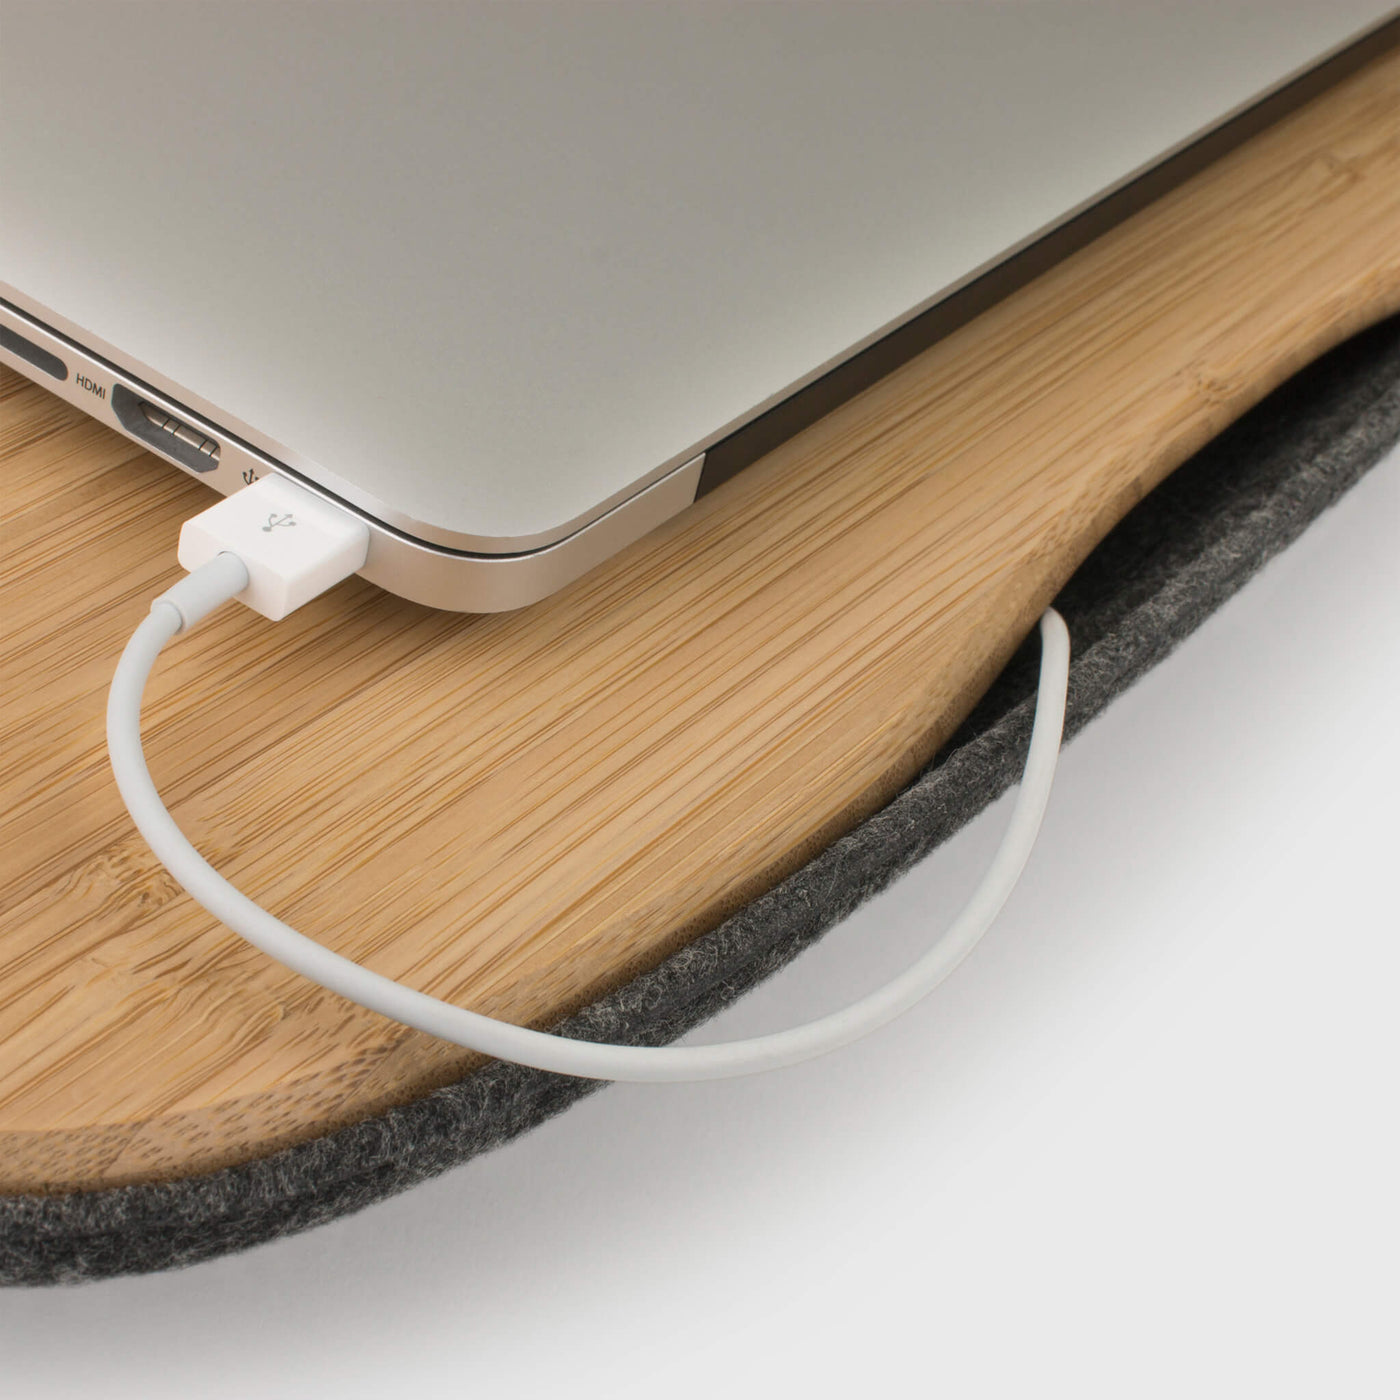 Detail of USB cable management from Macbook into lap table of Lapod Lap Desk by Objct. Sustainable Charcoal or Ash Grey